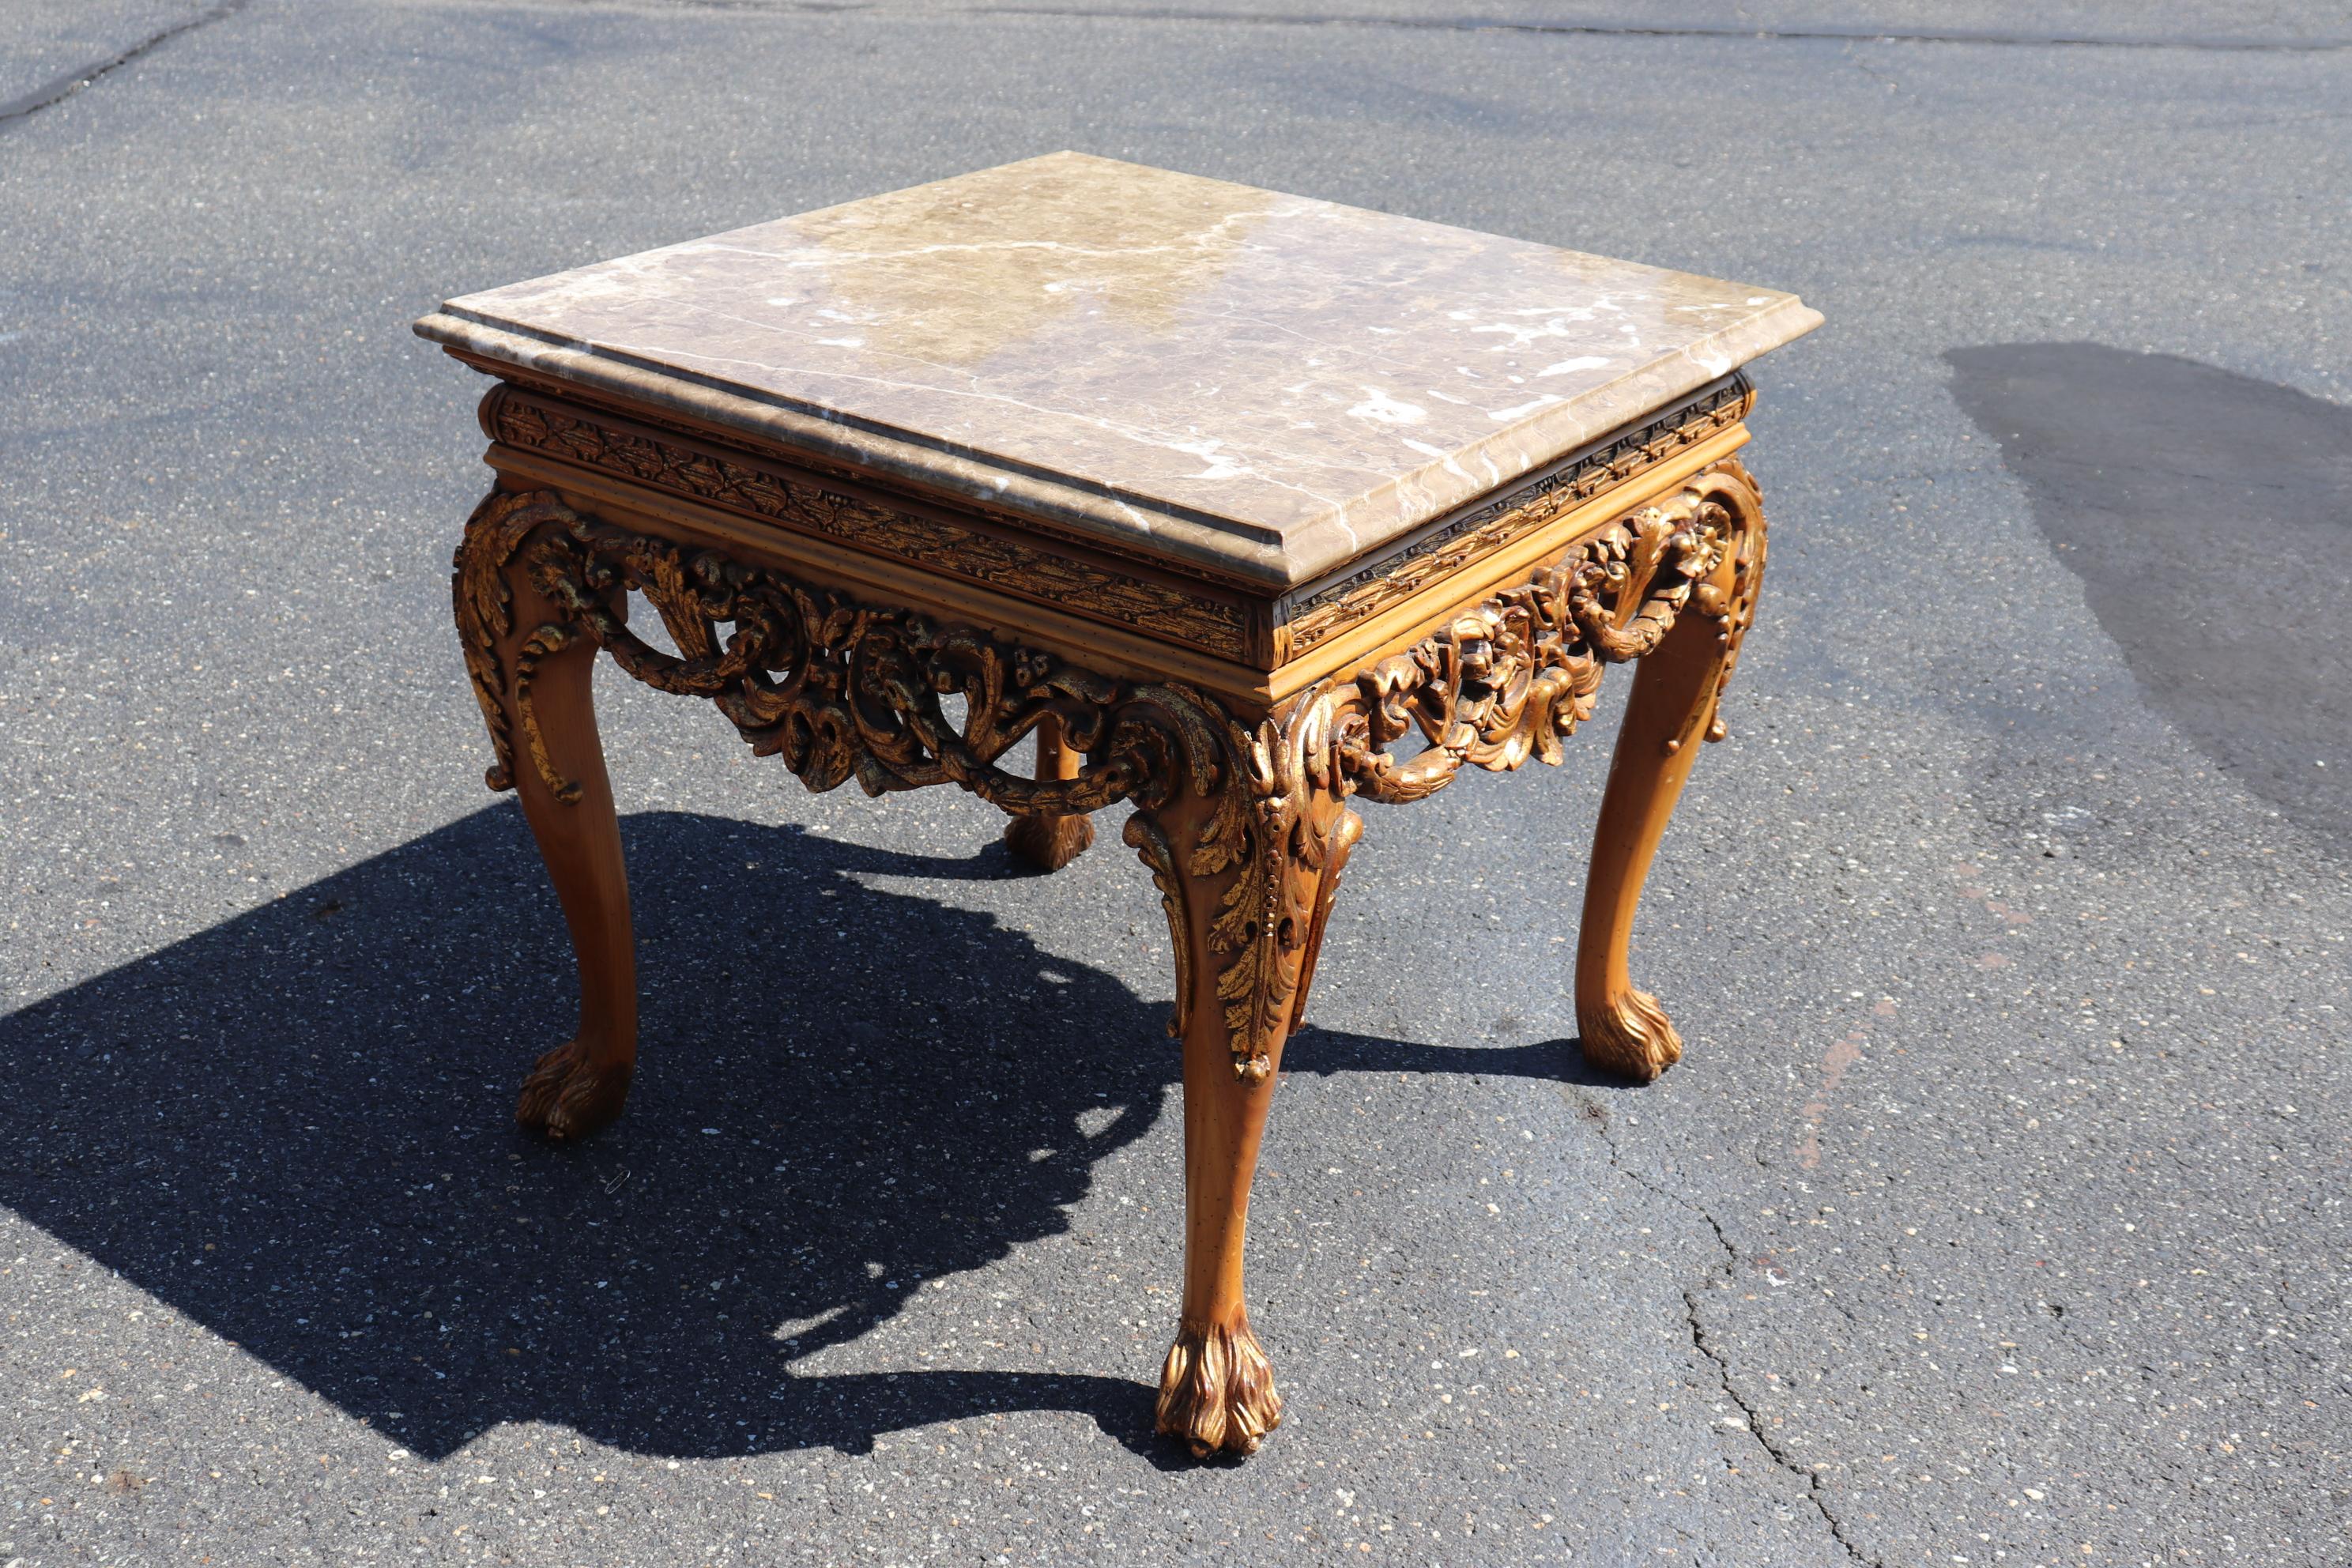 This is a fantastic William Switzer table made of solid oine with gilt wood highlights, The top is a beautiful piece of marble and the table was made in Europe. The table measures 33 wide x 33 deep x 31 tall. The table dates to the 2000s era and